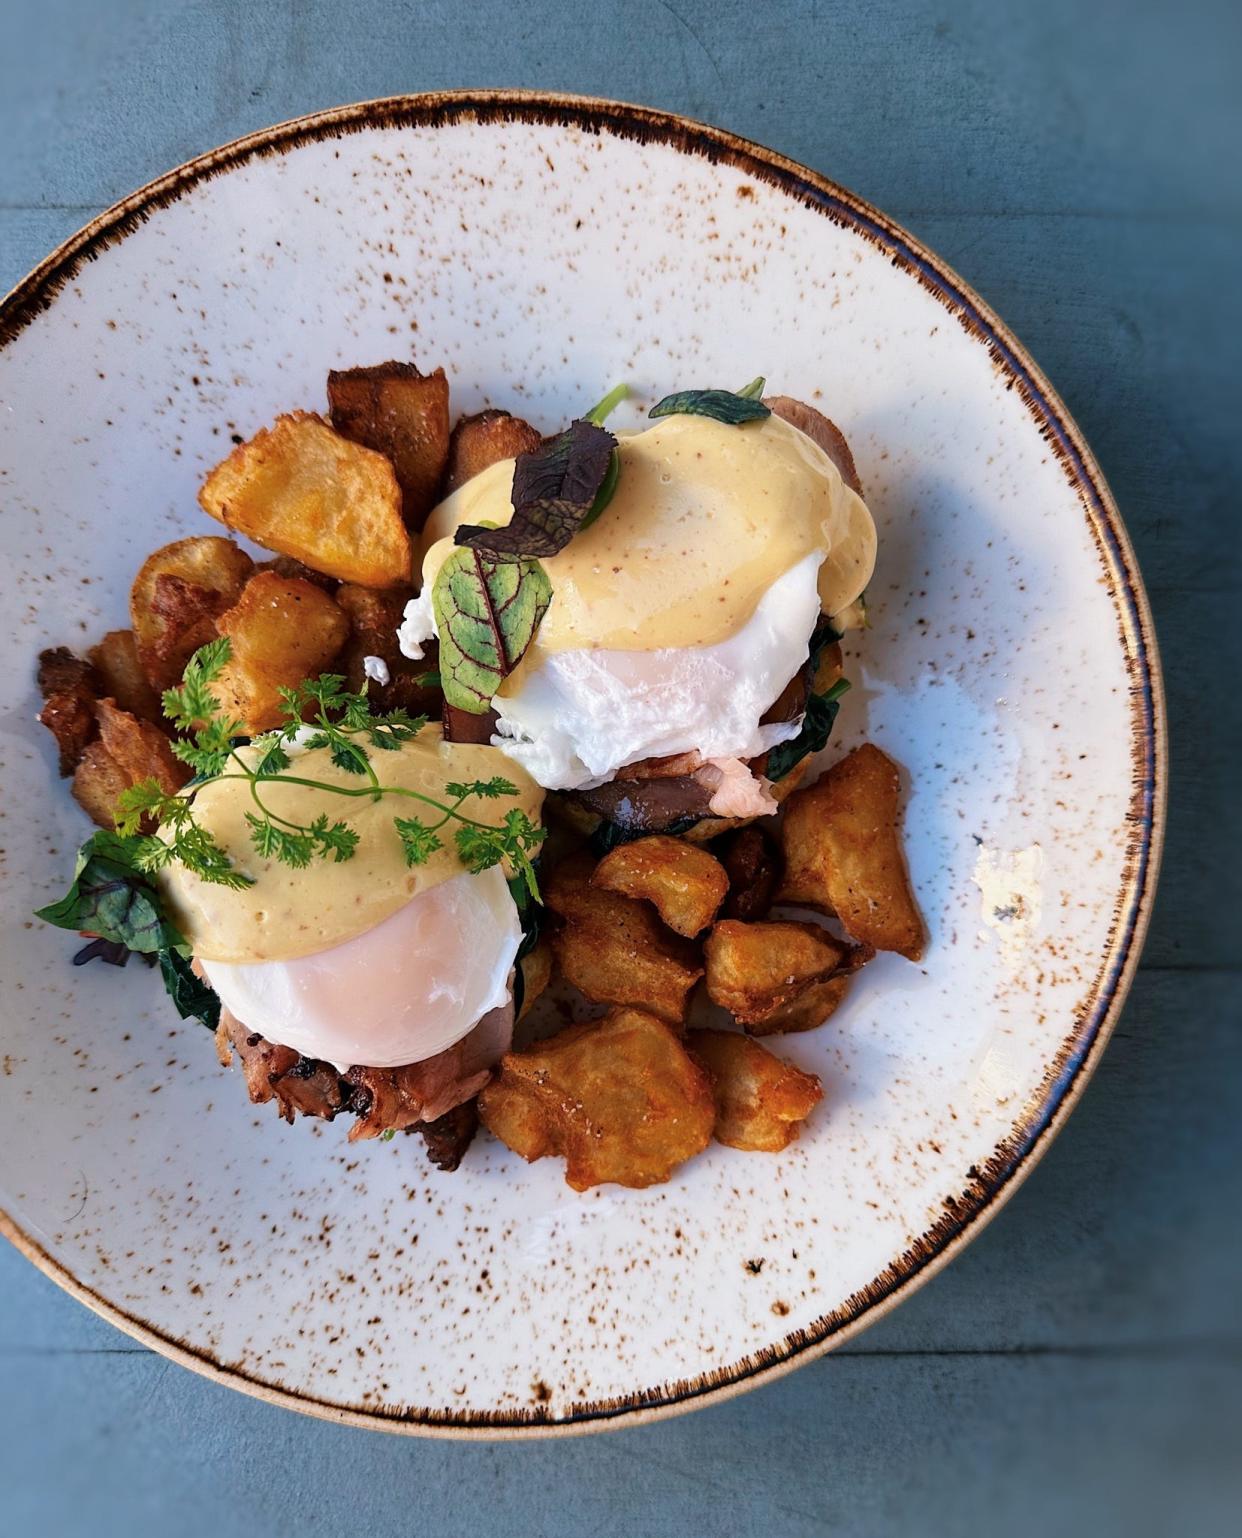 Washington House, in Sellersville, serves brunch on Sundays with dishes such as eggs benedict.